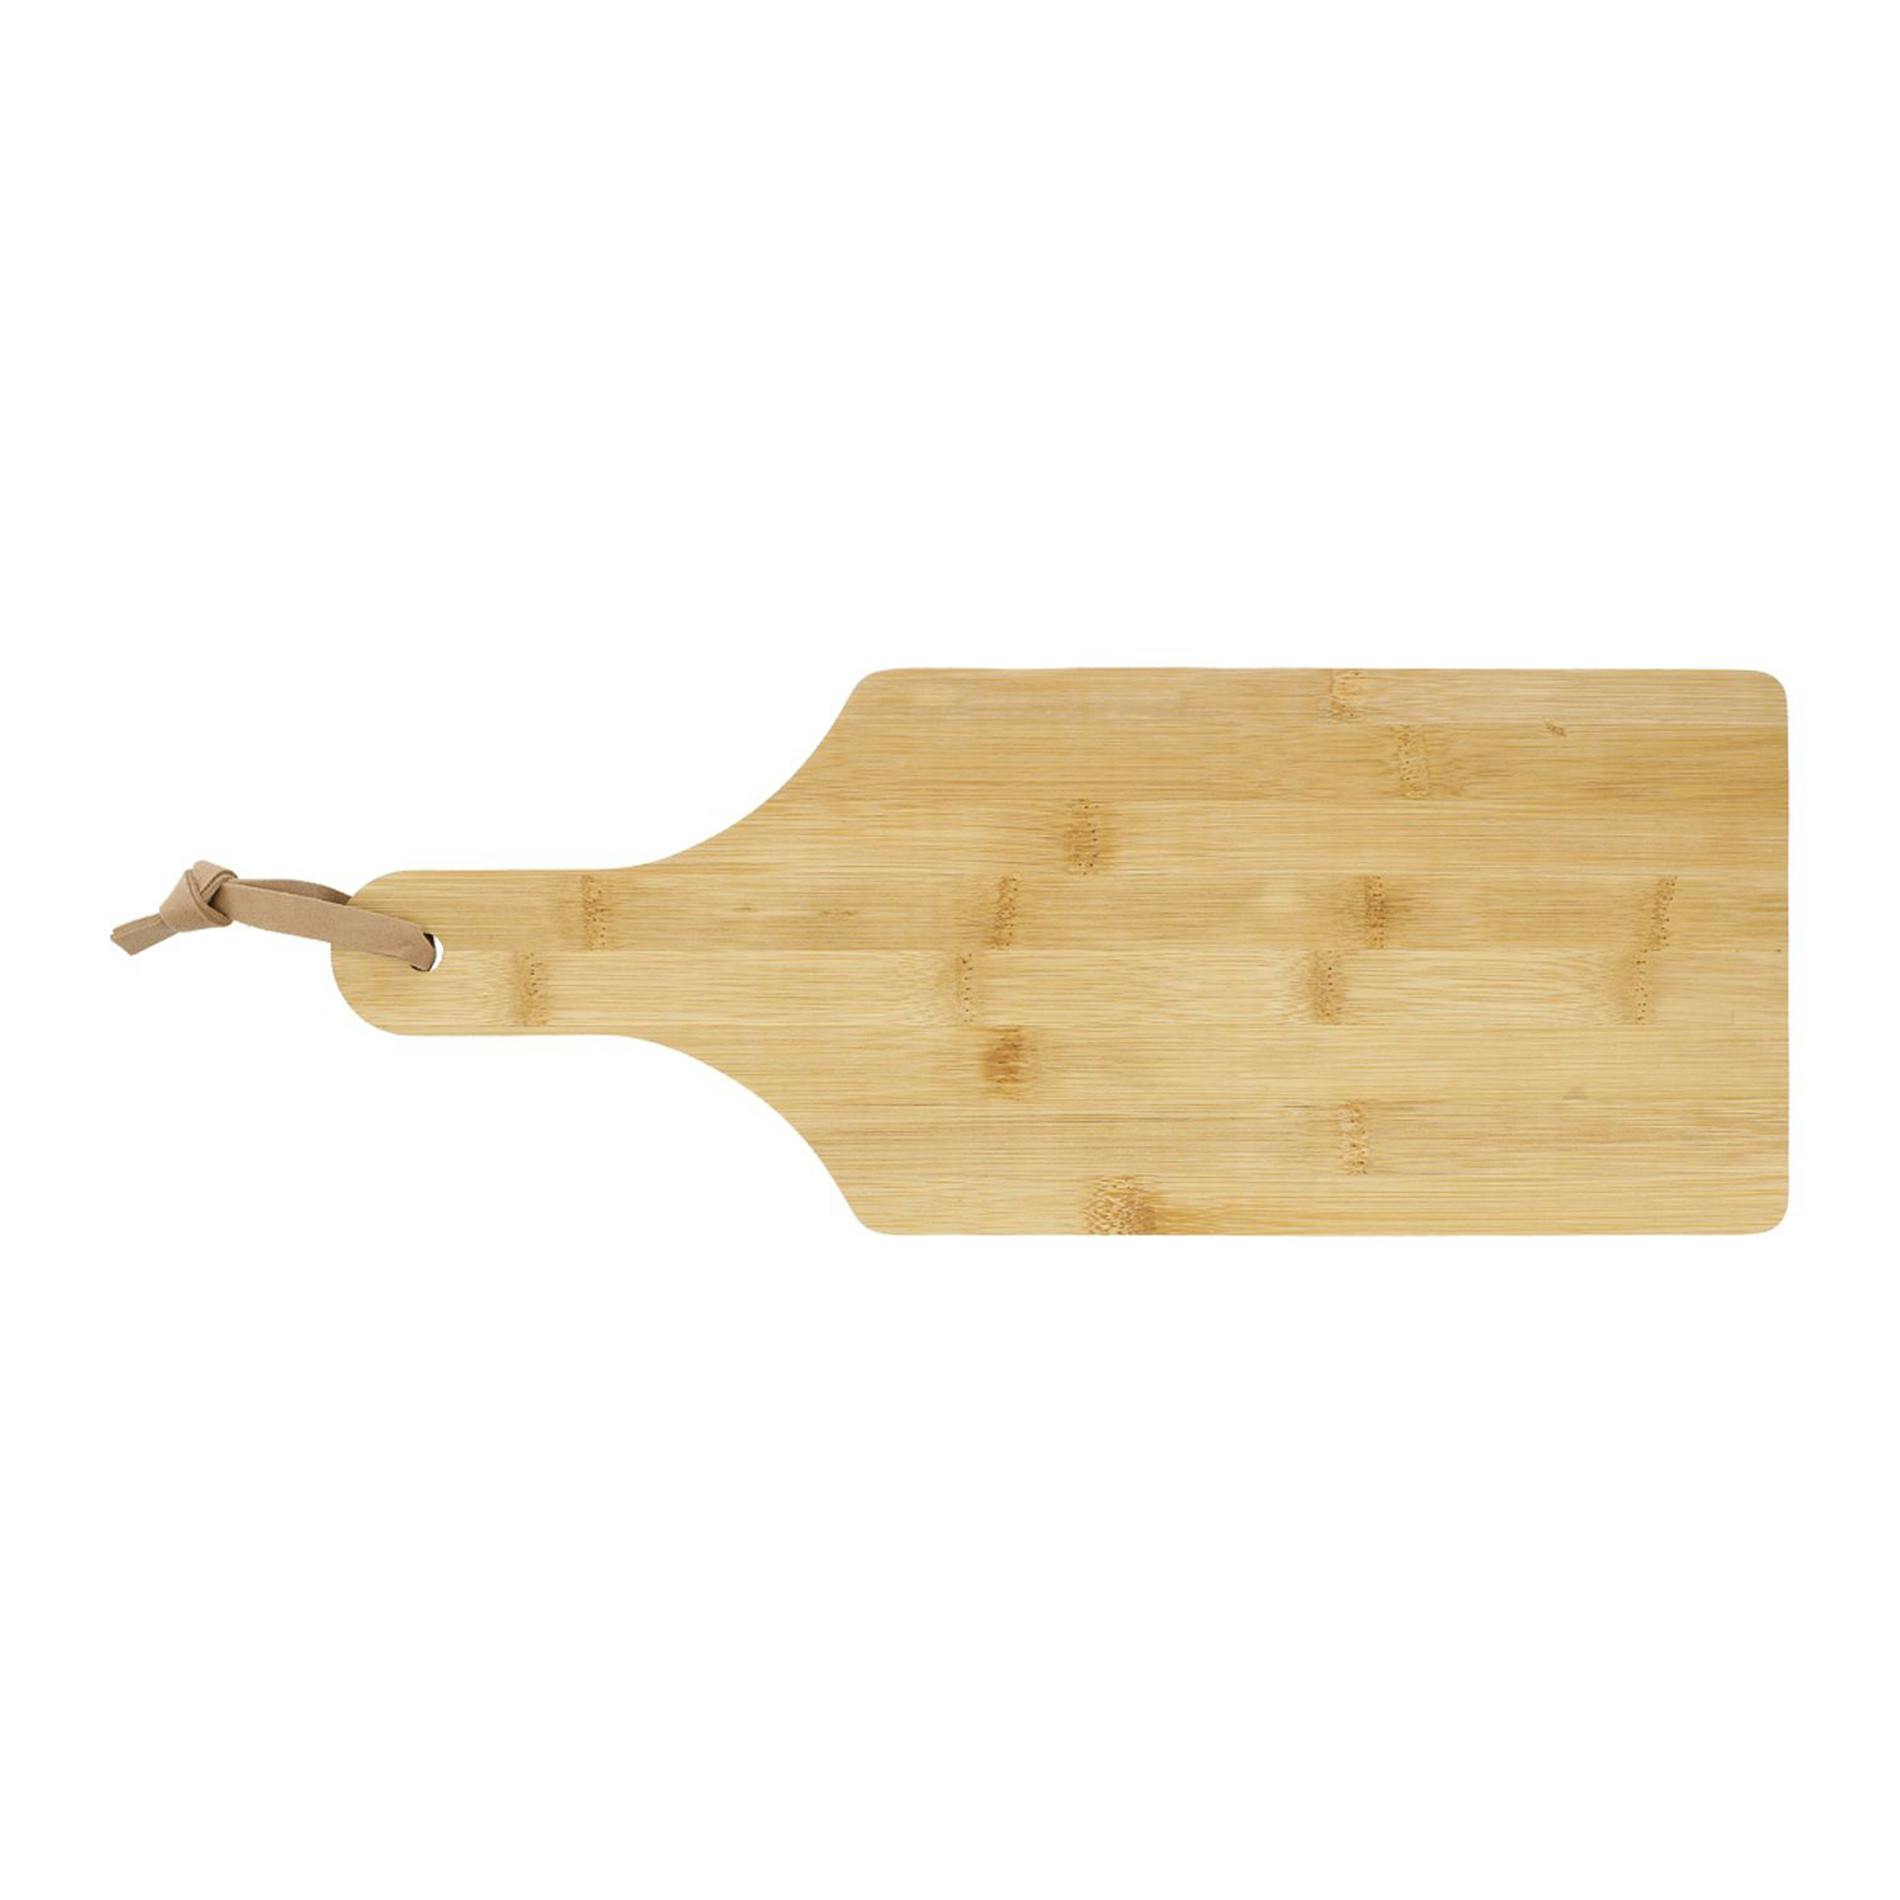 Bamboo Cutting Board with Handle - additional Image 3